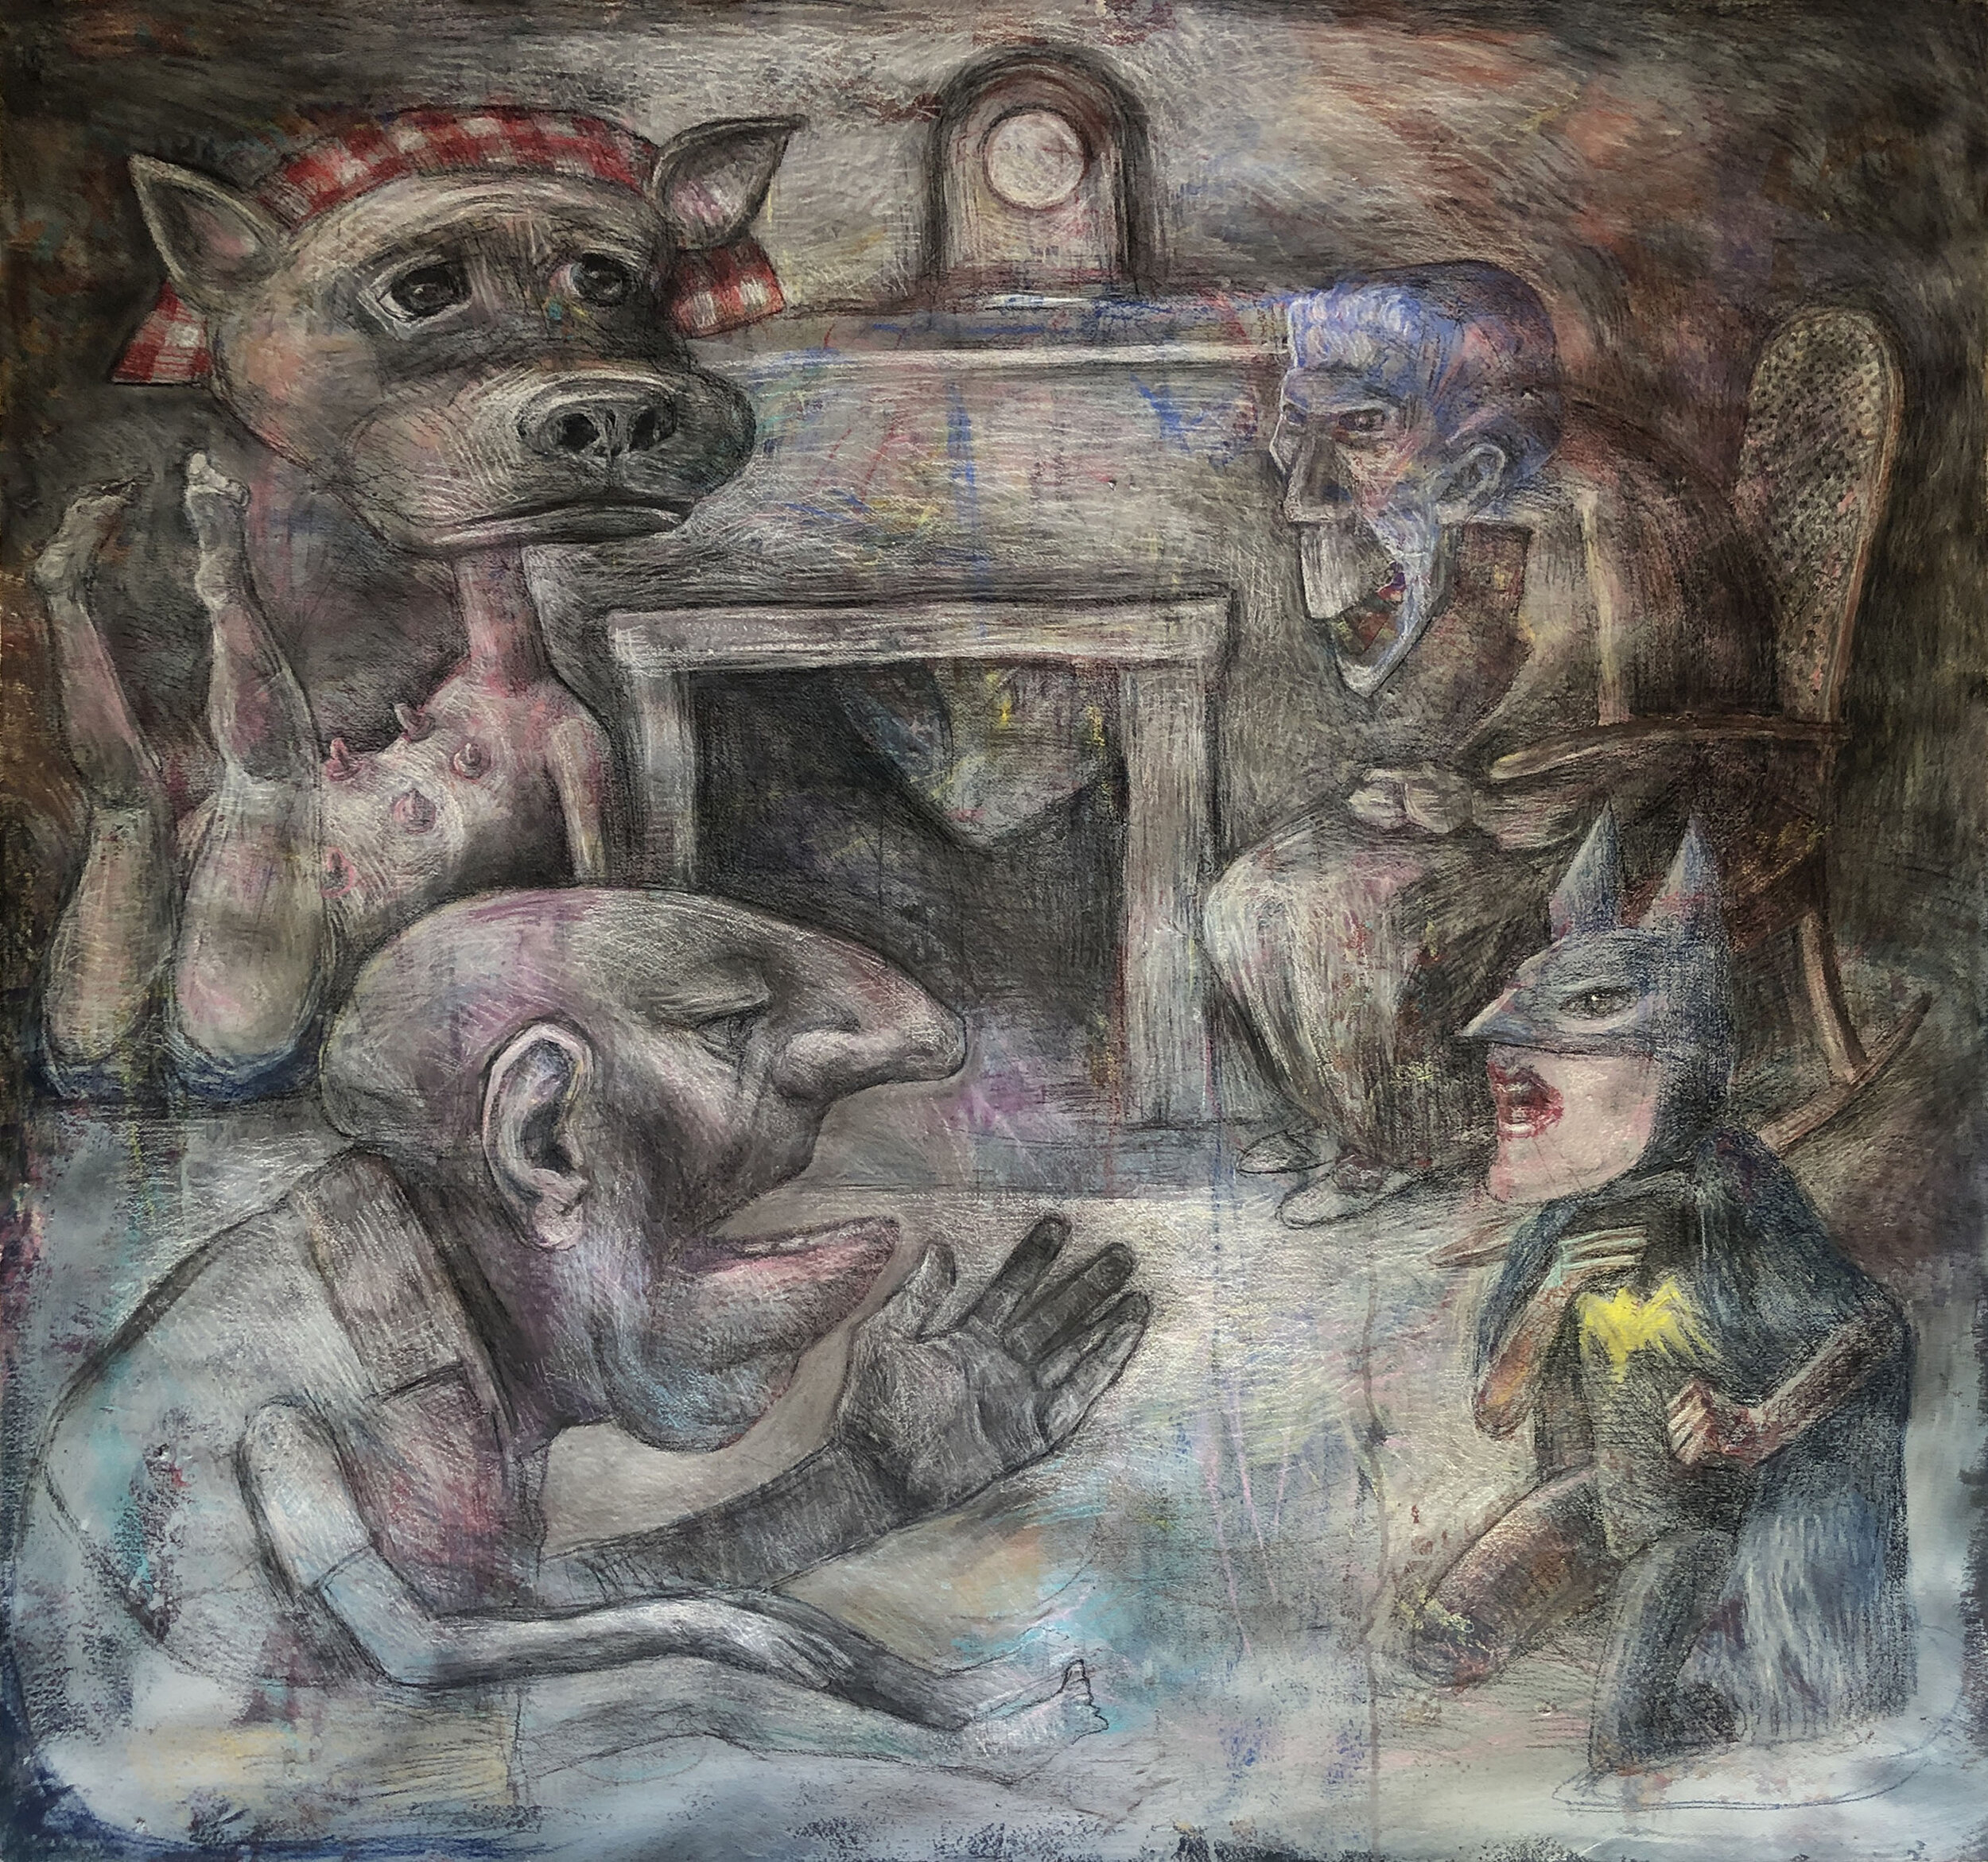 Domestic Bliss 2020 45" x 43.5" Mixed media on paper